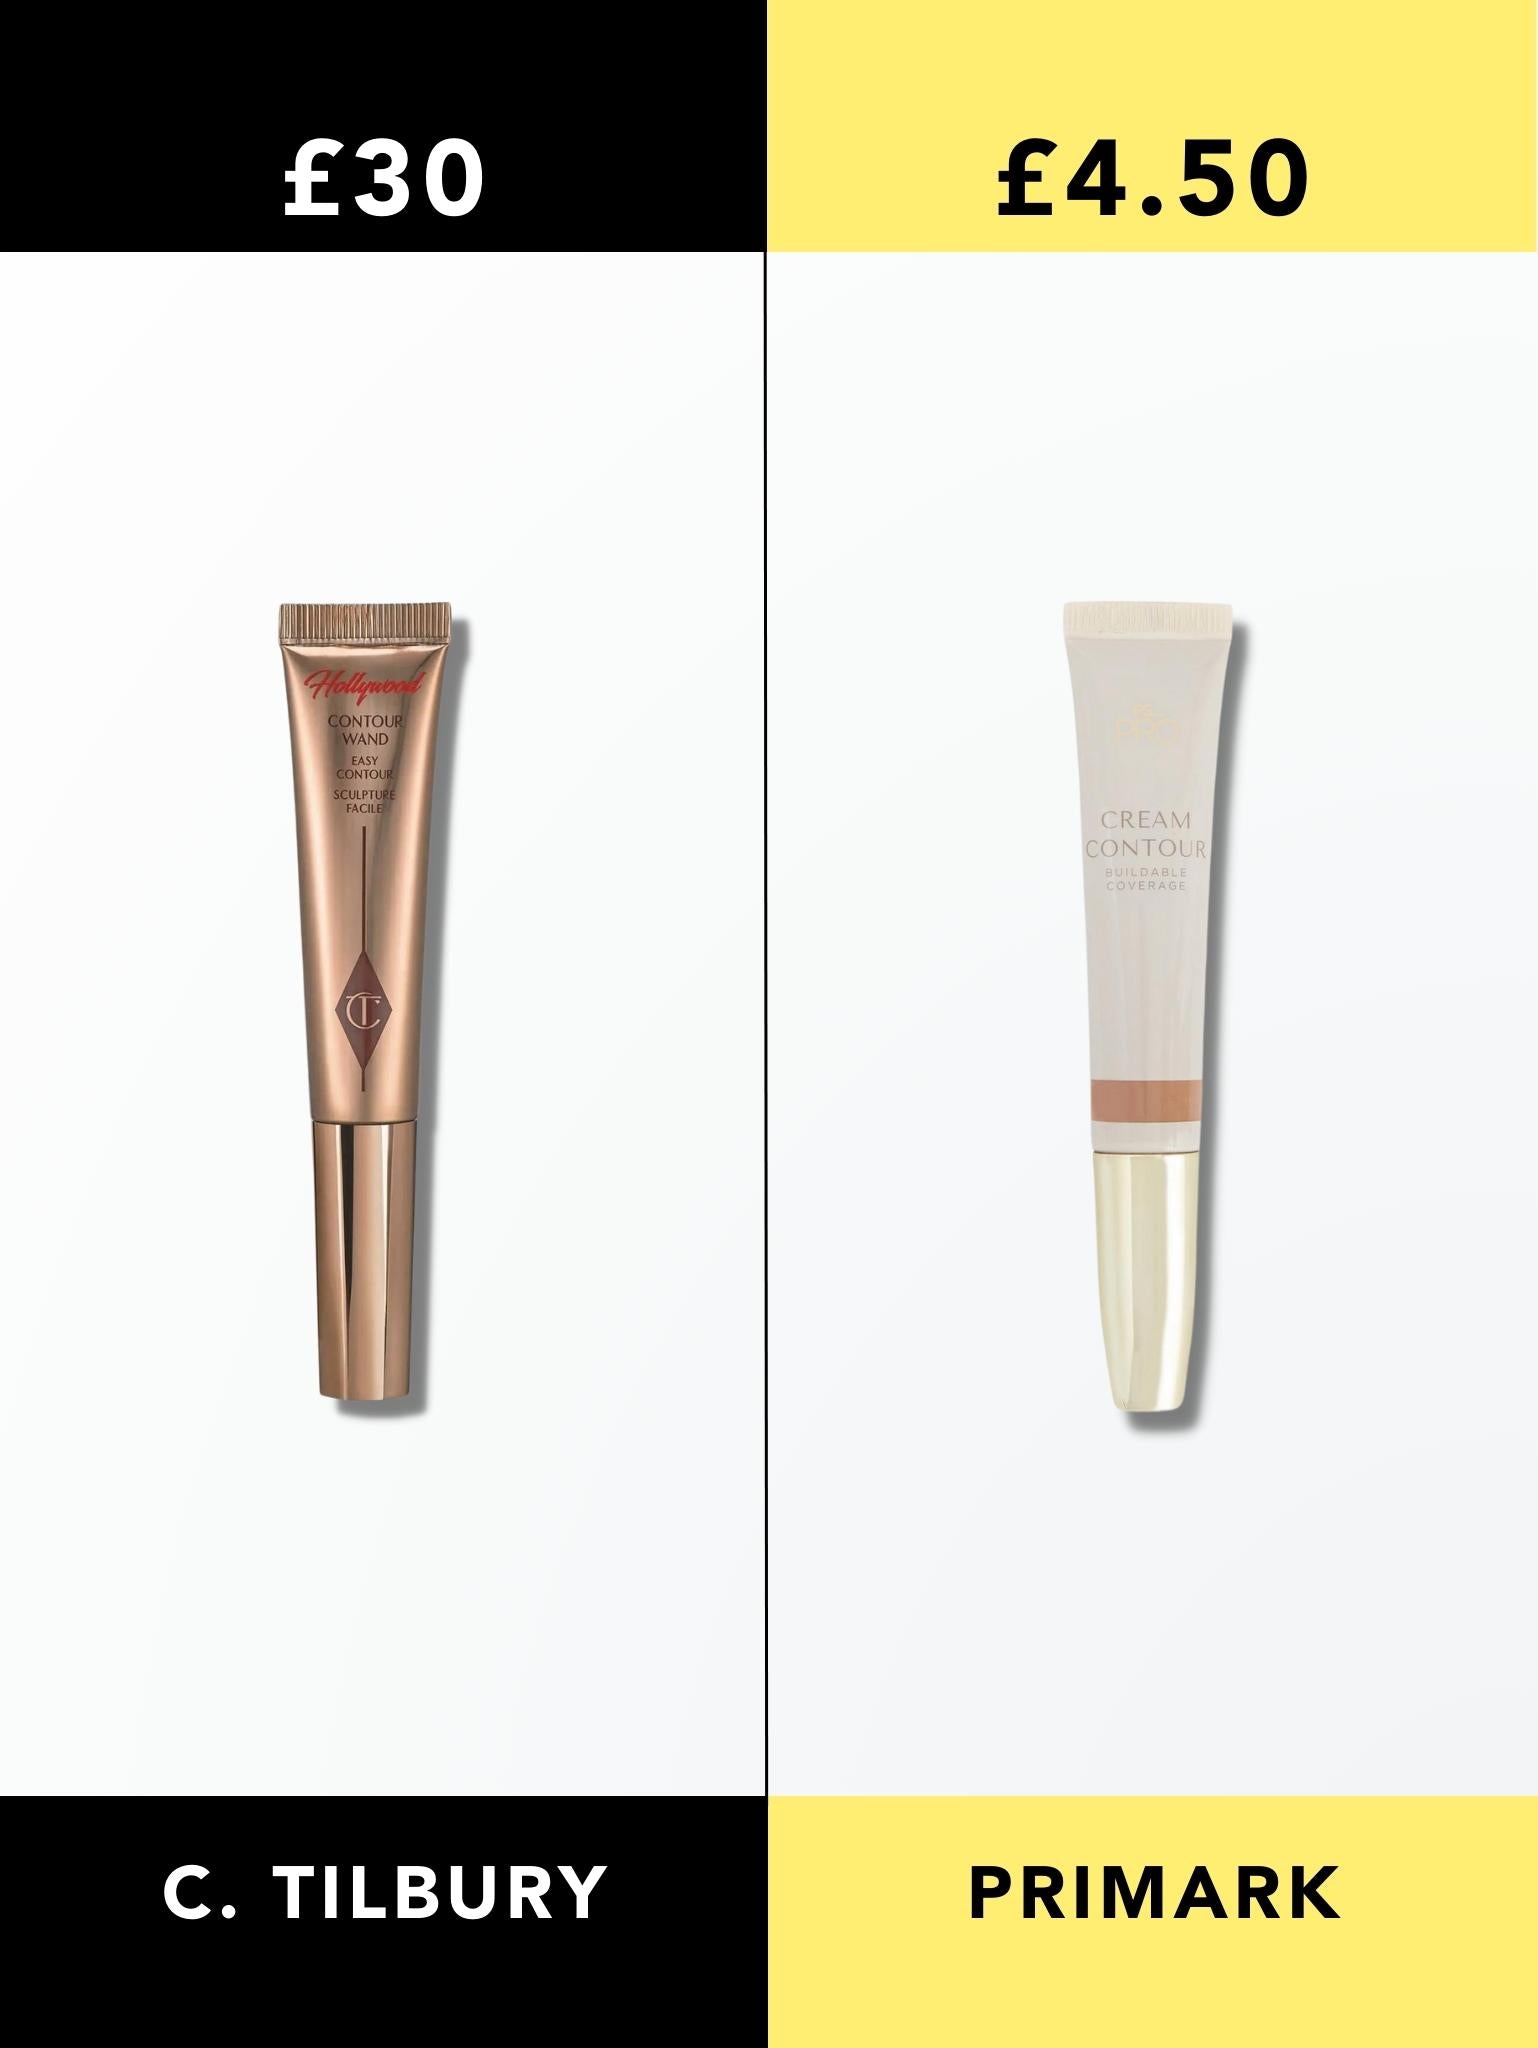 All Makeup Product Comparisons By Experts: High-End vs Dupe – Dupeshop